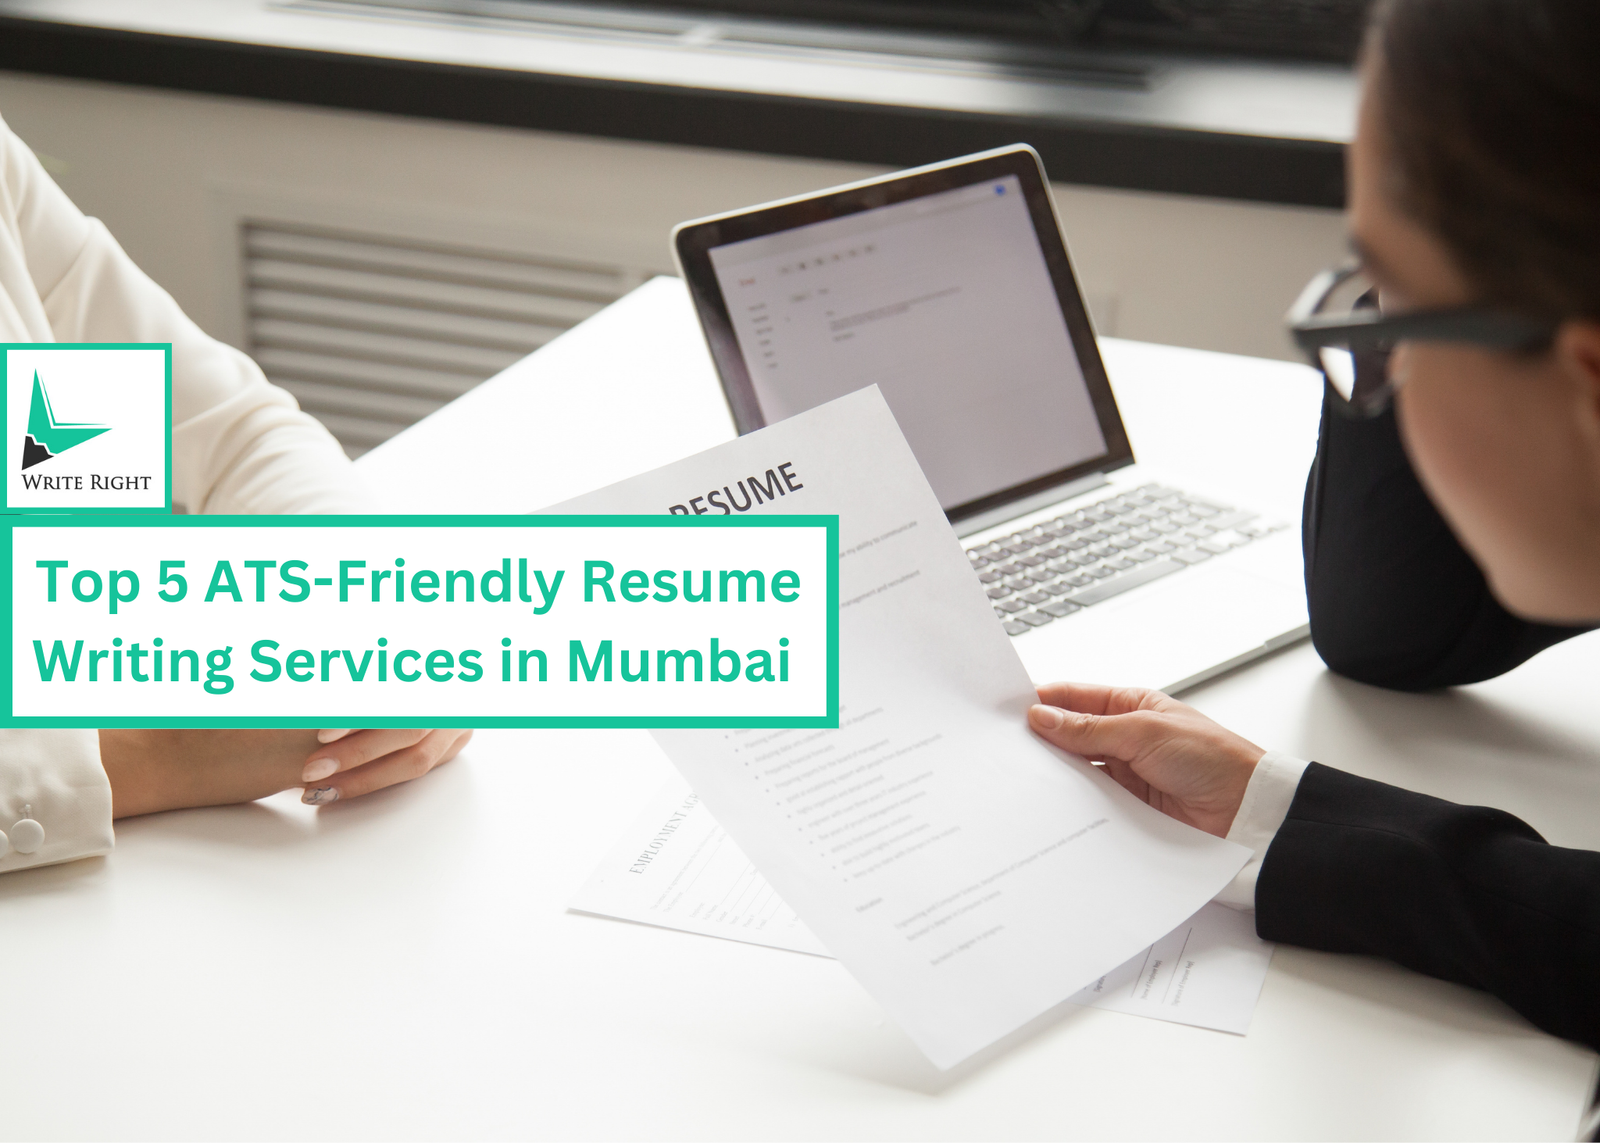 Top 5 ATS-Friendly Resume Writing Services in Mumbai for Job Seekers